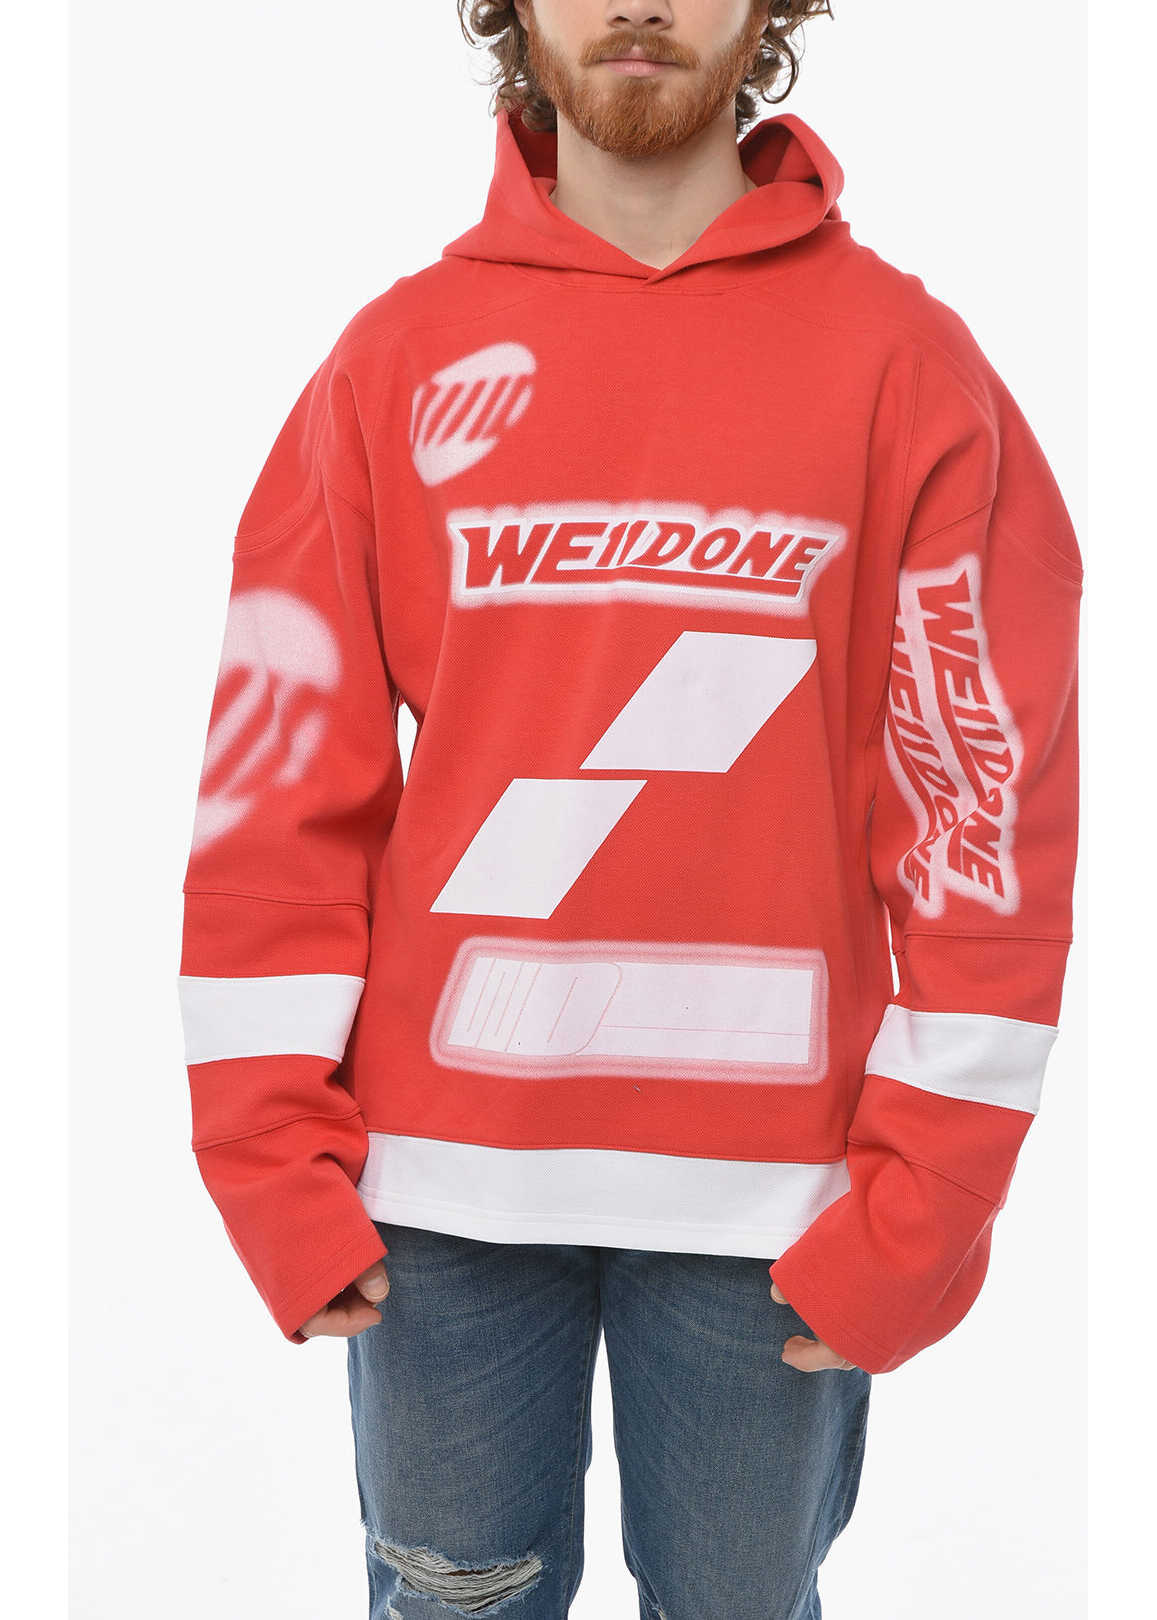 WE11DONE Spray Effect Football Oversized Hoodie Red